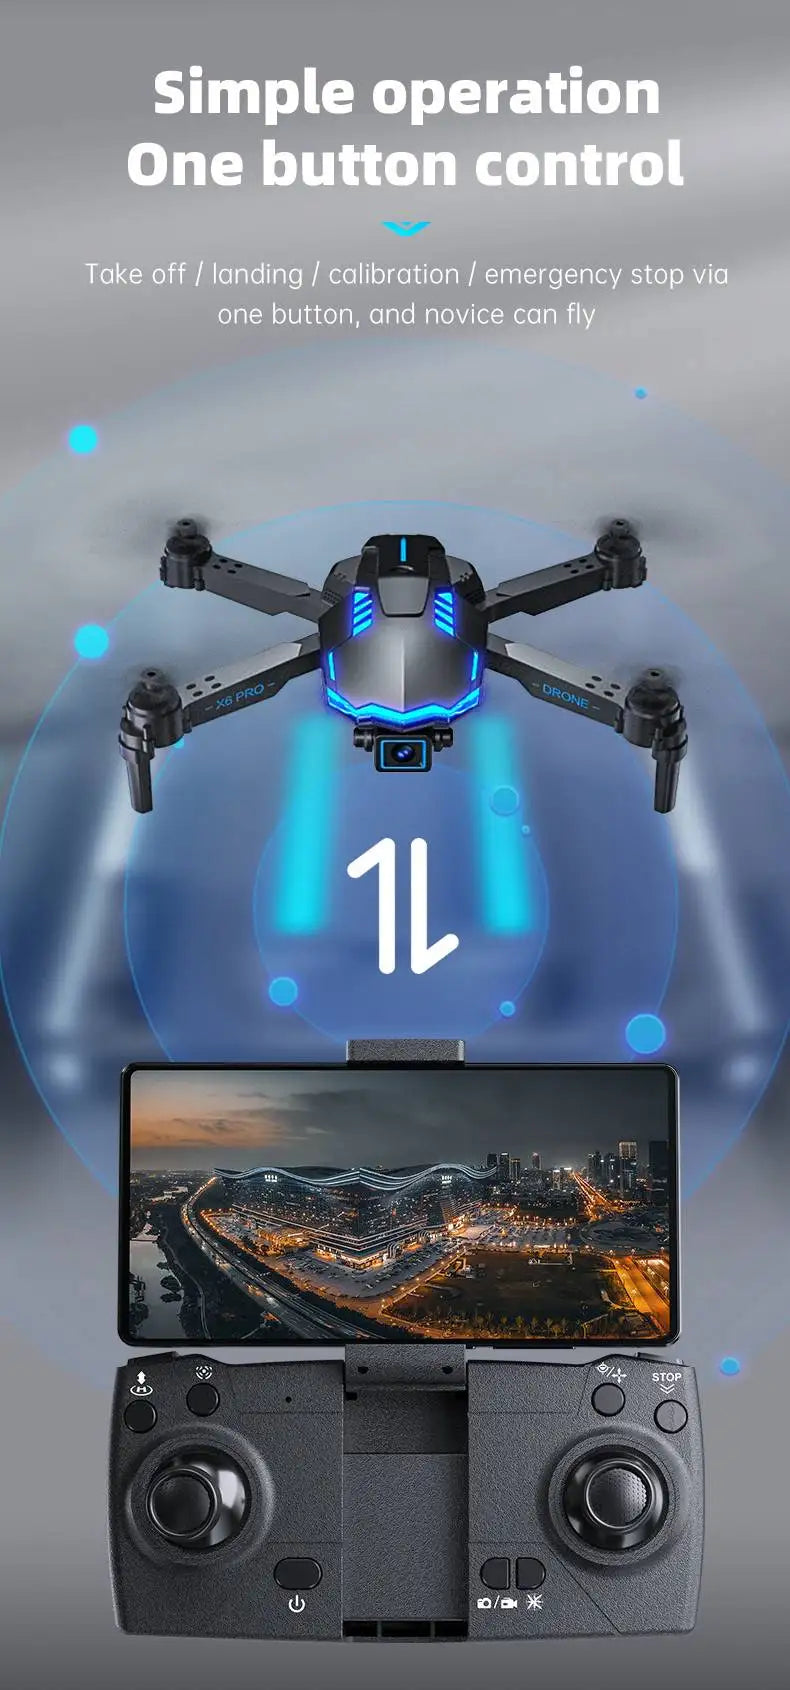 NEW X6 Drone, simple operation One button control Take off / landing / calibration / emergency stop via one